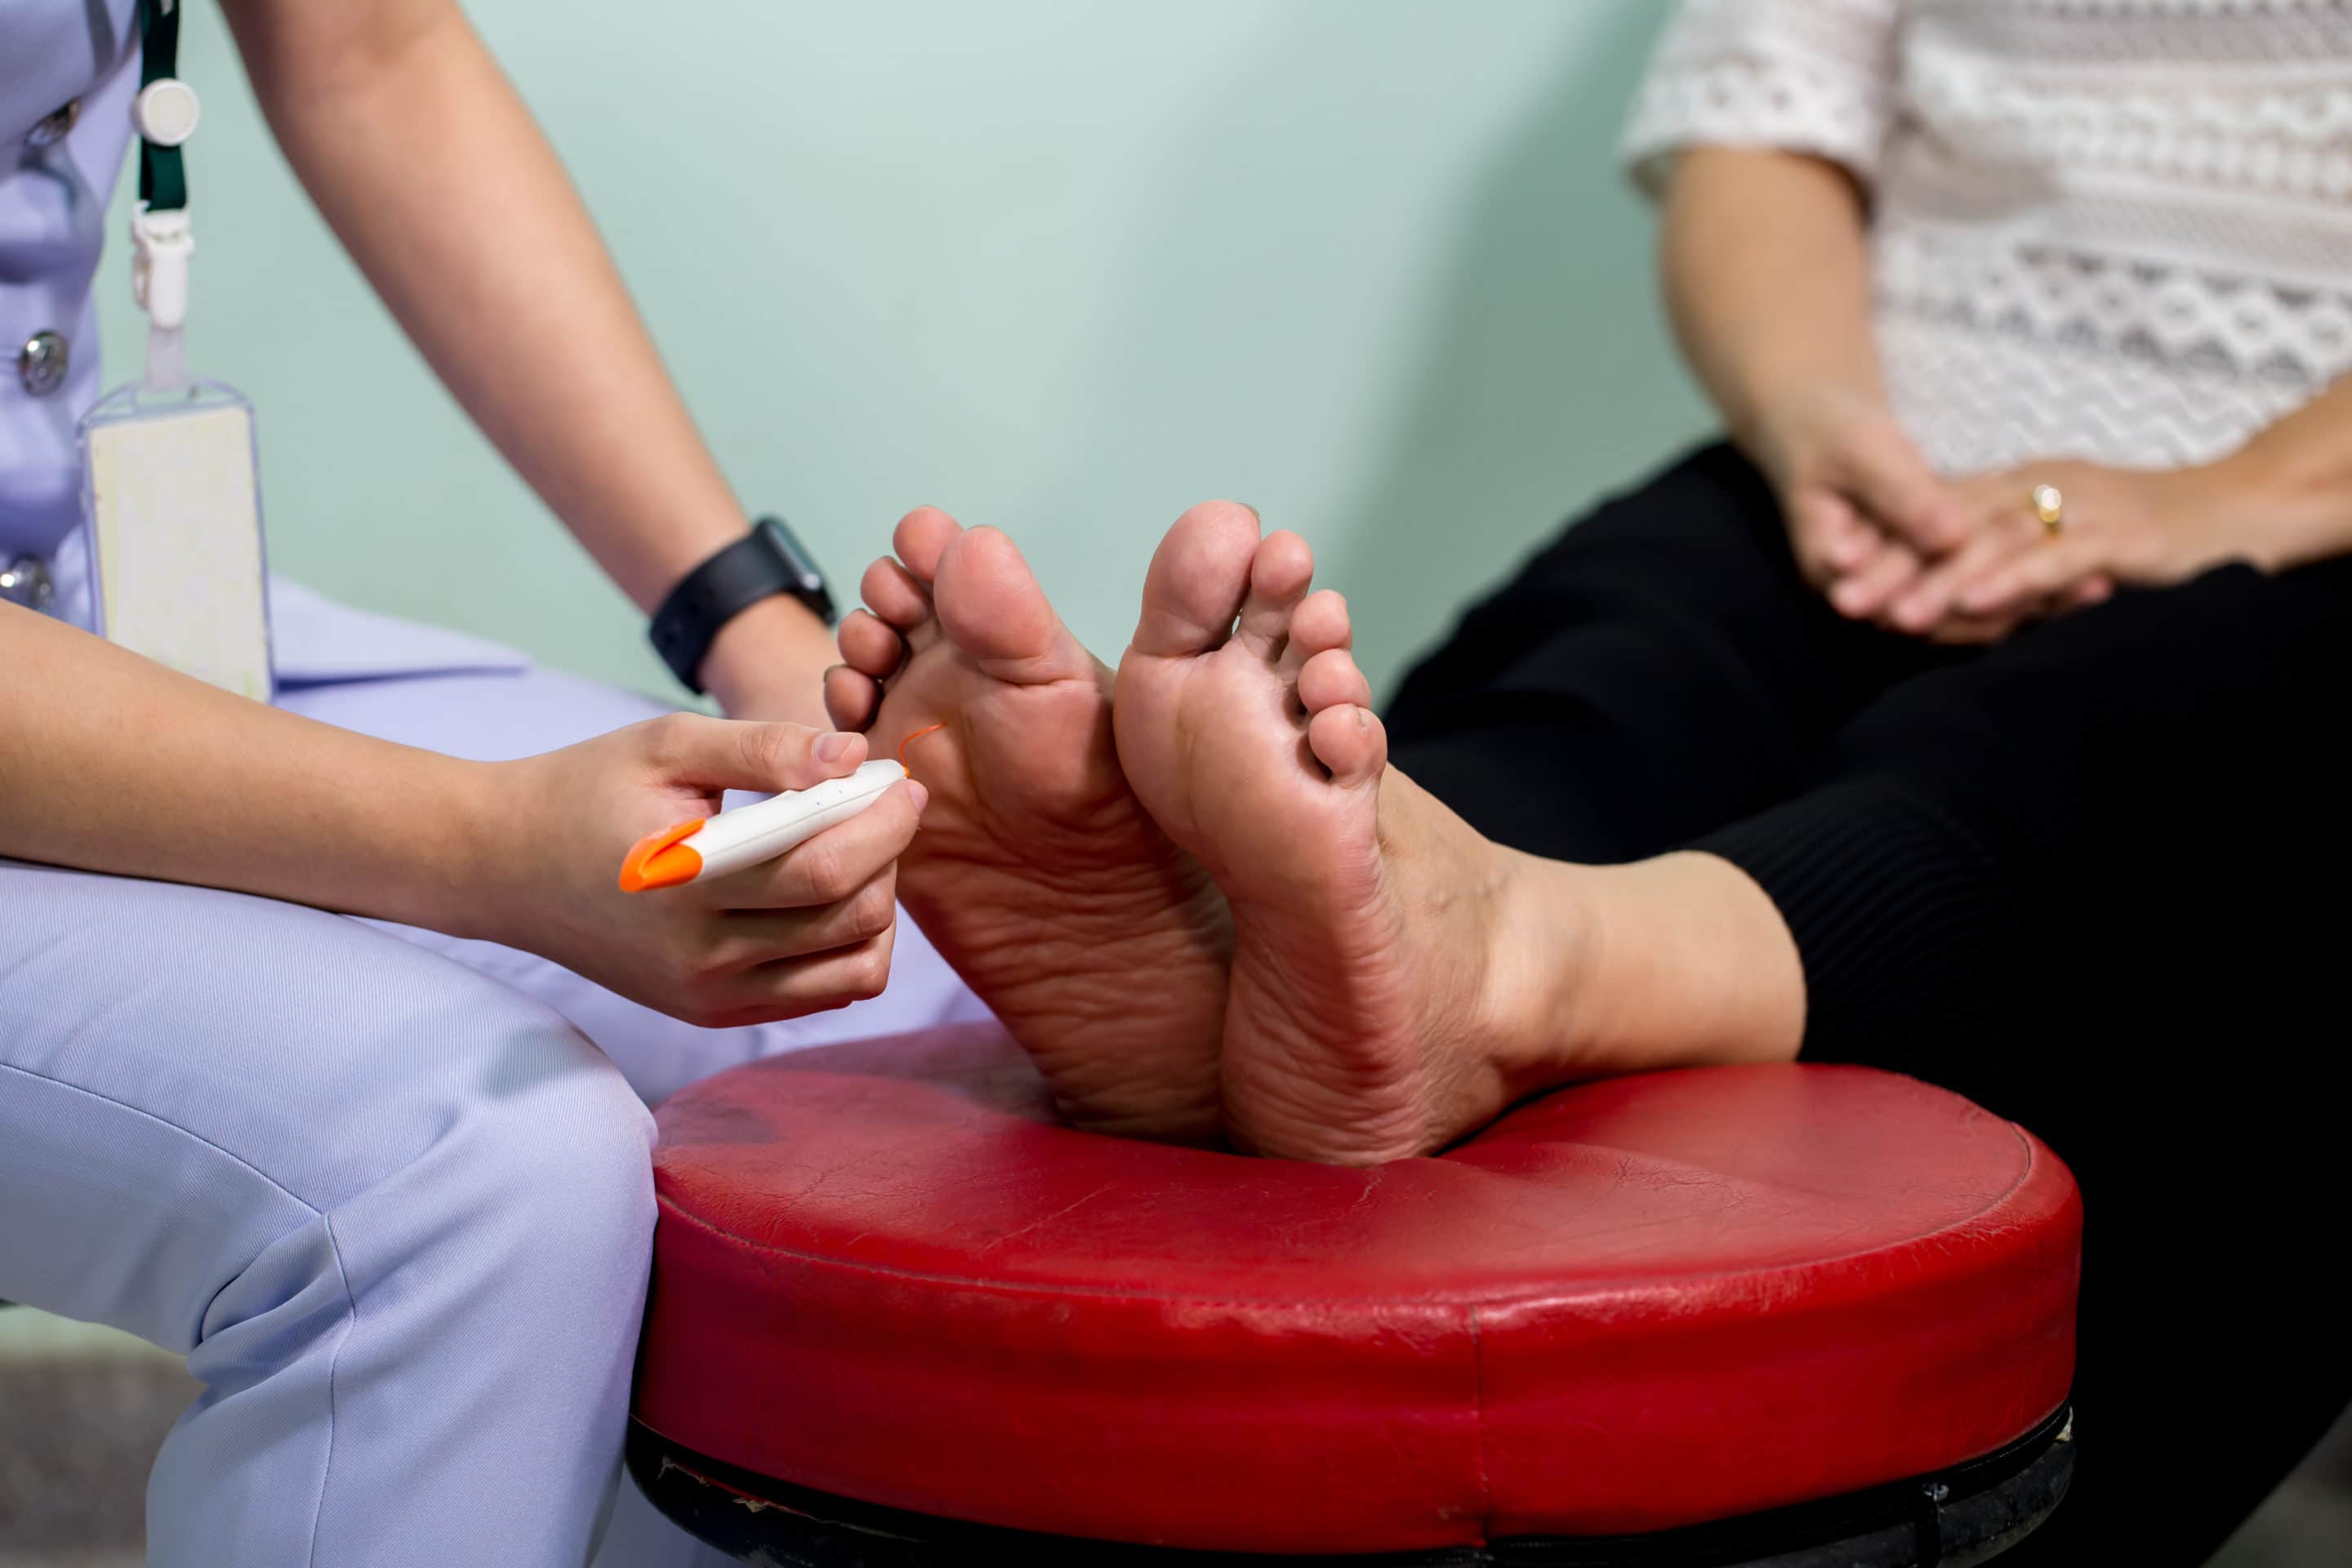 A Diabetic Foot Care Guide